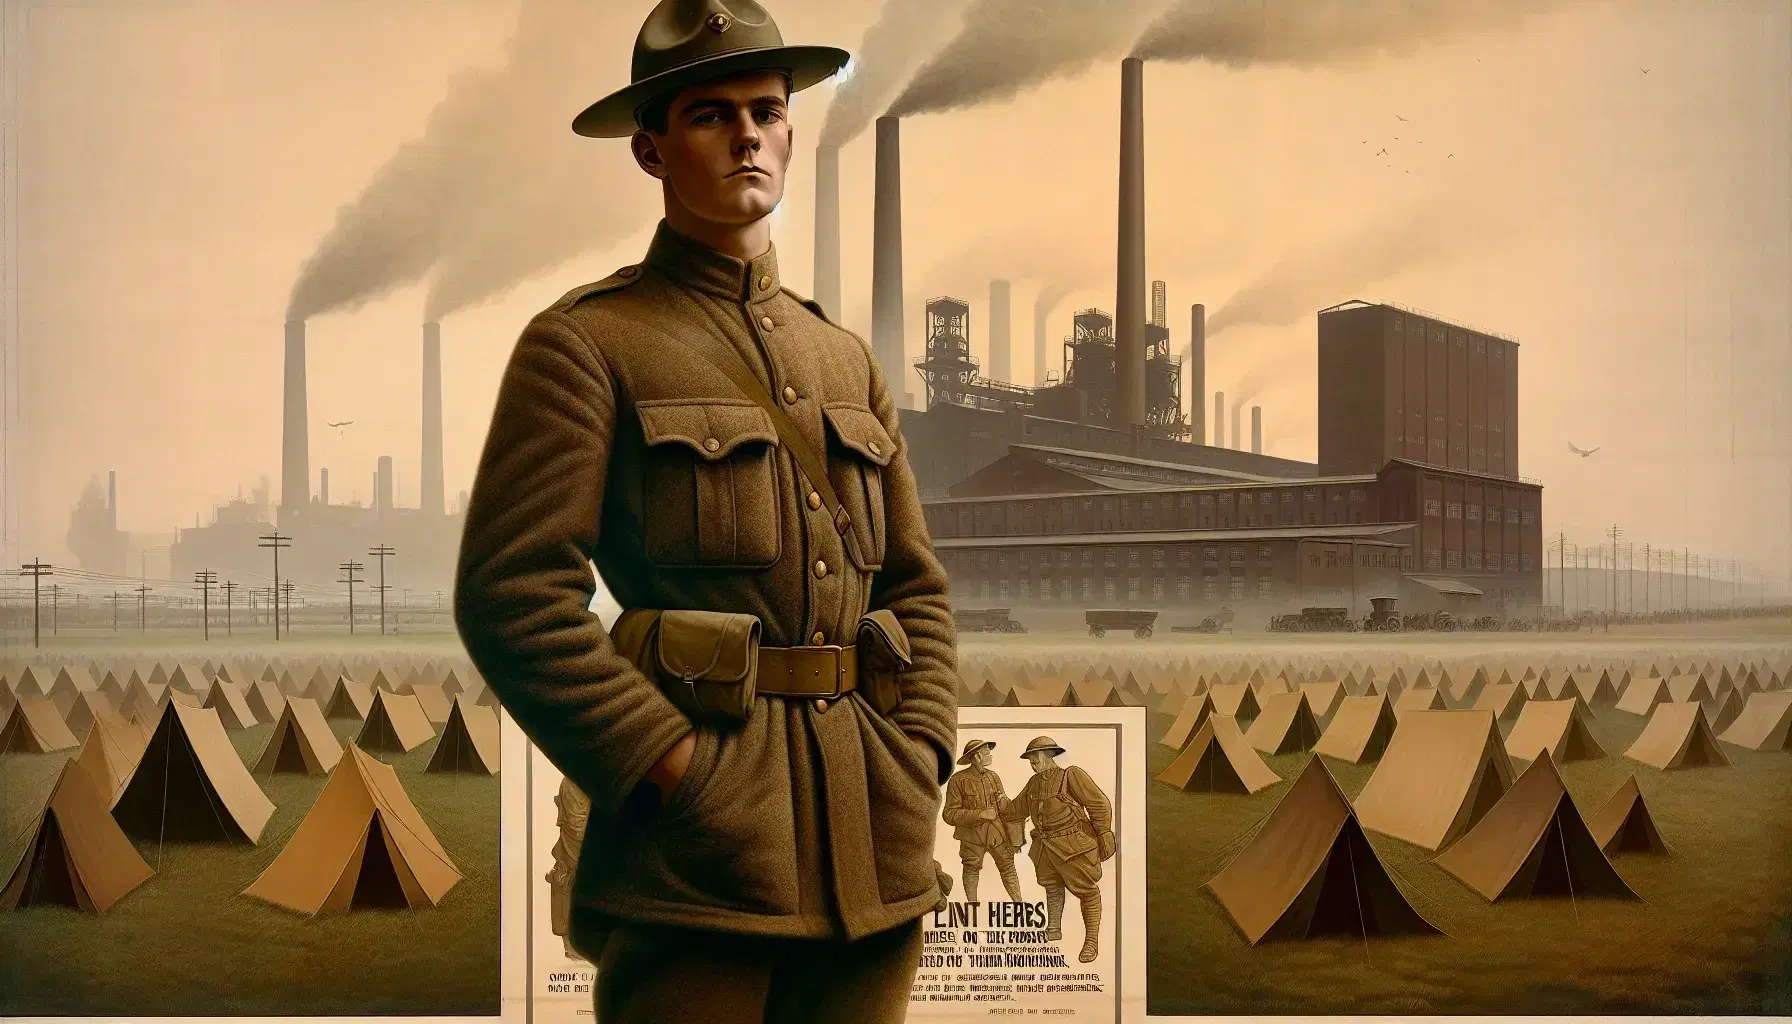 World War I American soldier in olive uniform stands at attention between industrial smokestacks and a field of military tents.